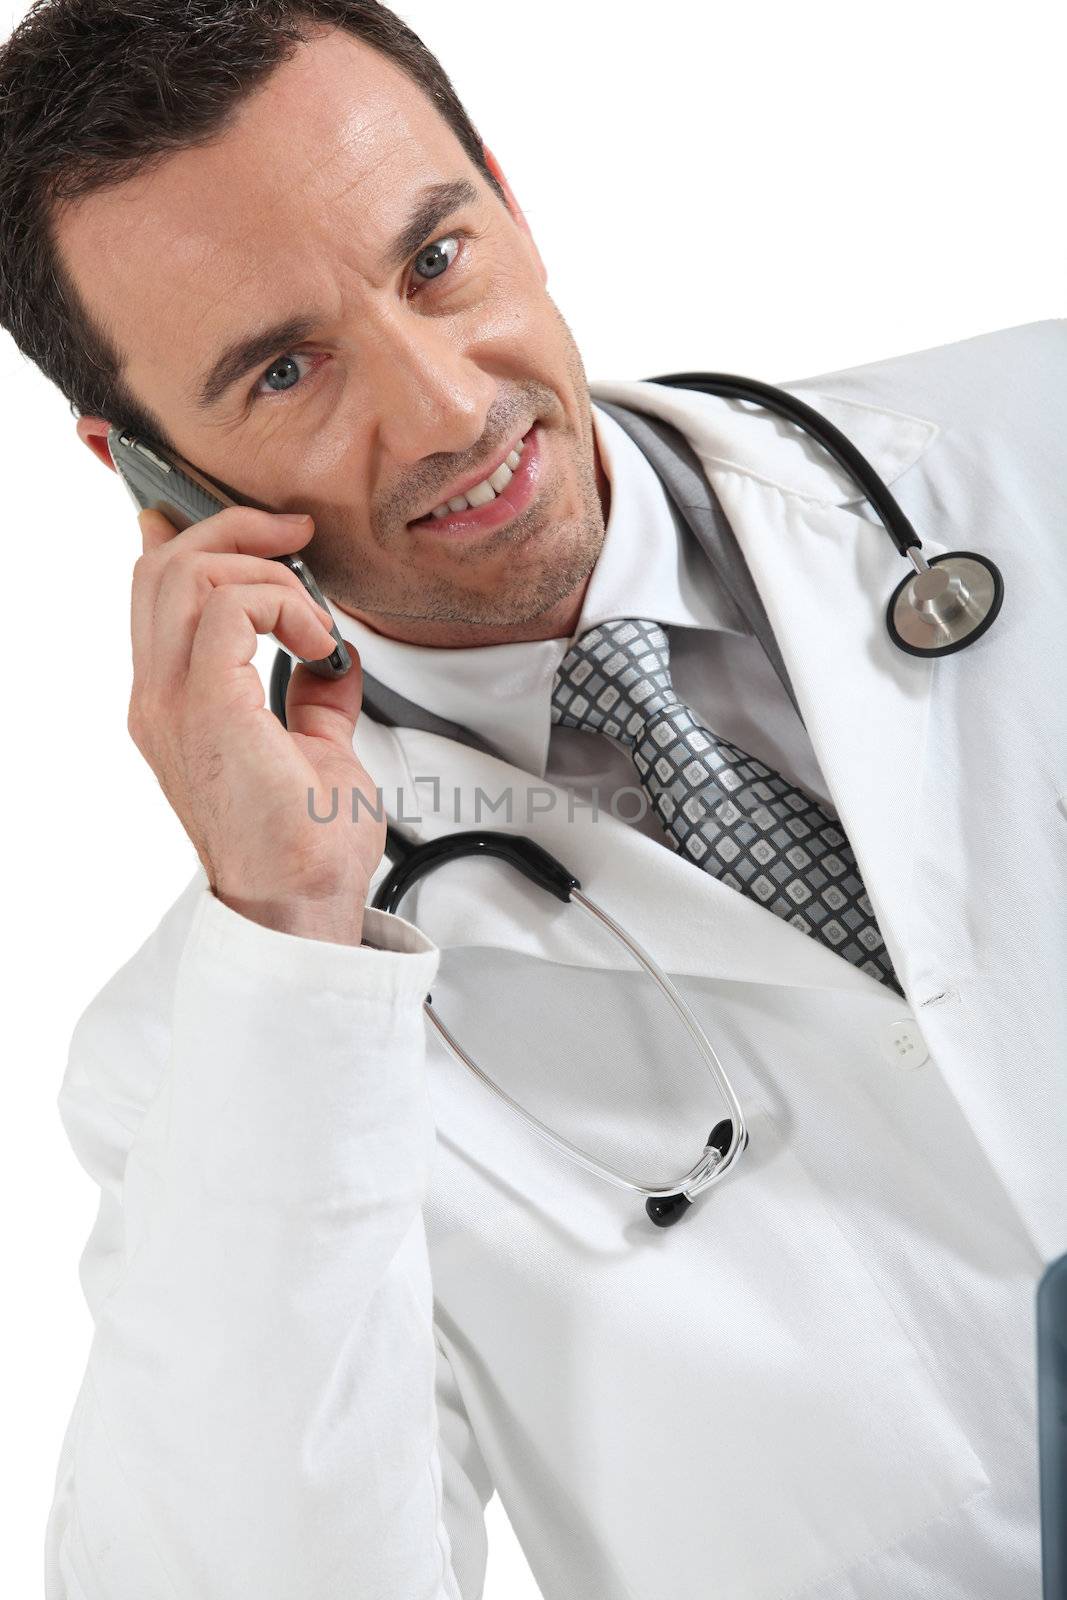 Male doctor with mobile telephone by phovoir